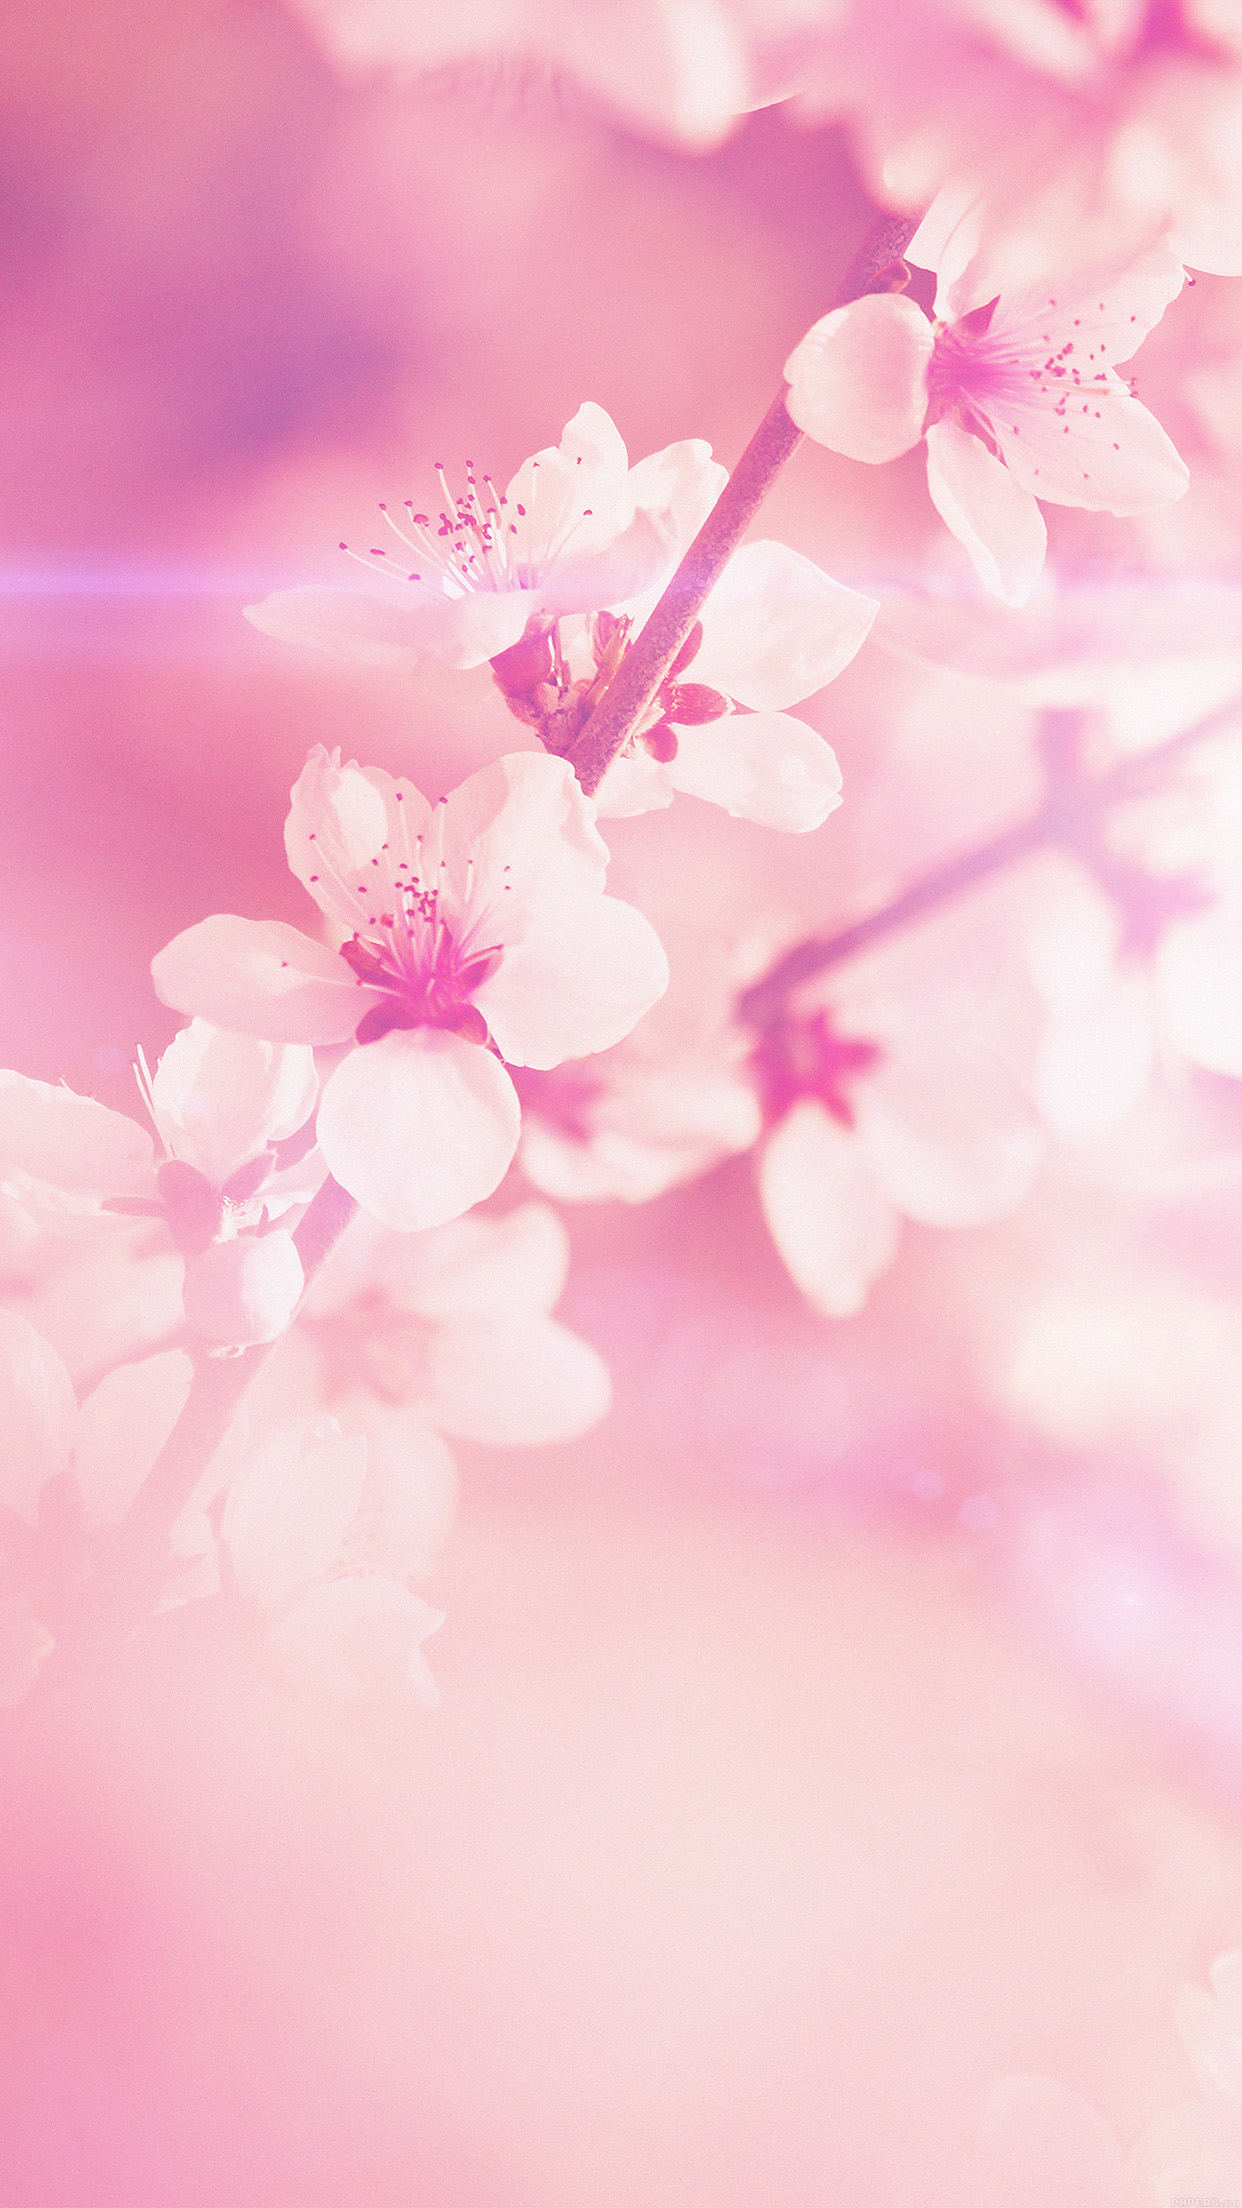 Spring Flower Pink Cherry Blossom Flare Nature Android wallpaper